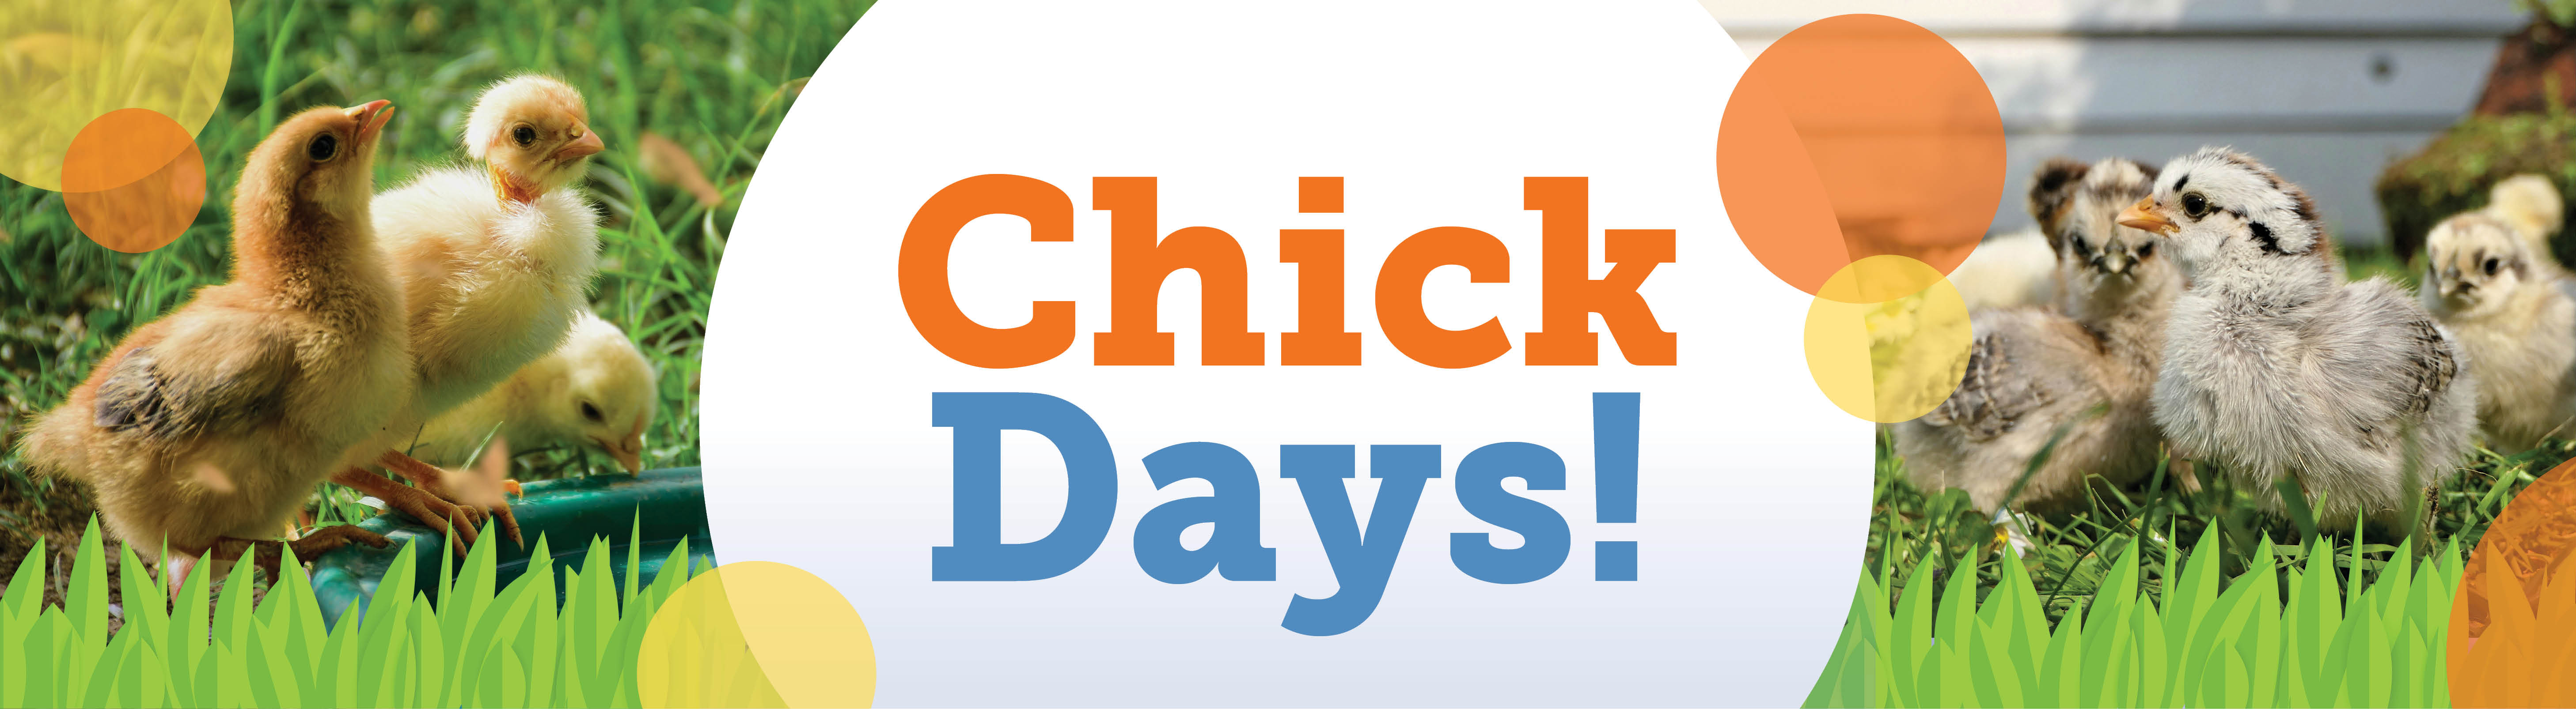 Chick Days Category Banner